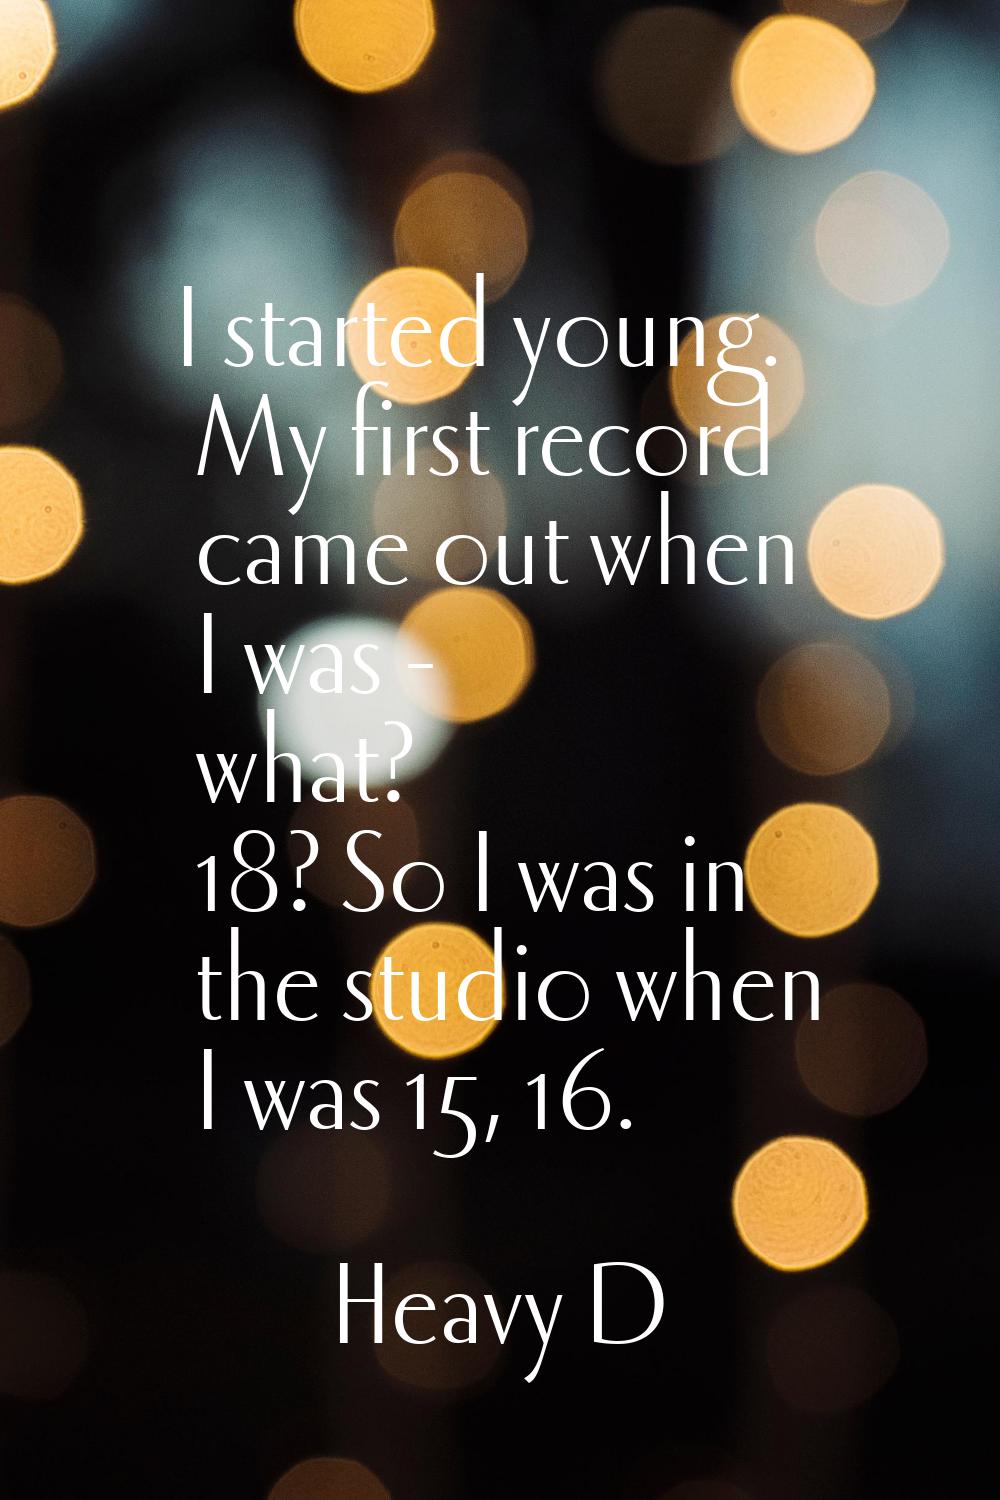 I started young. My first record came out when I was - what? 18? So I was in the studio when I was 